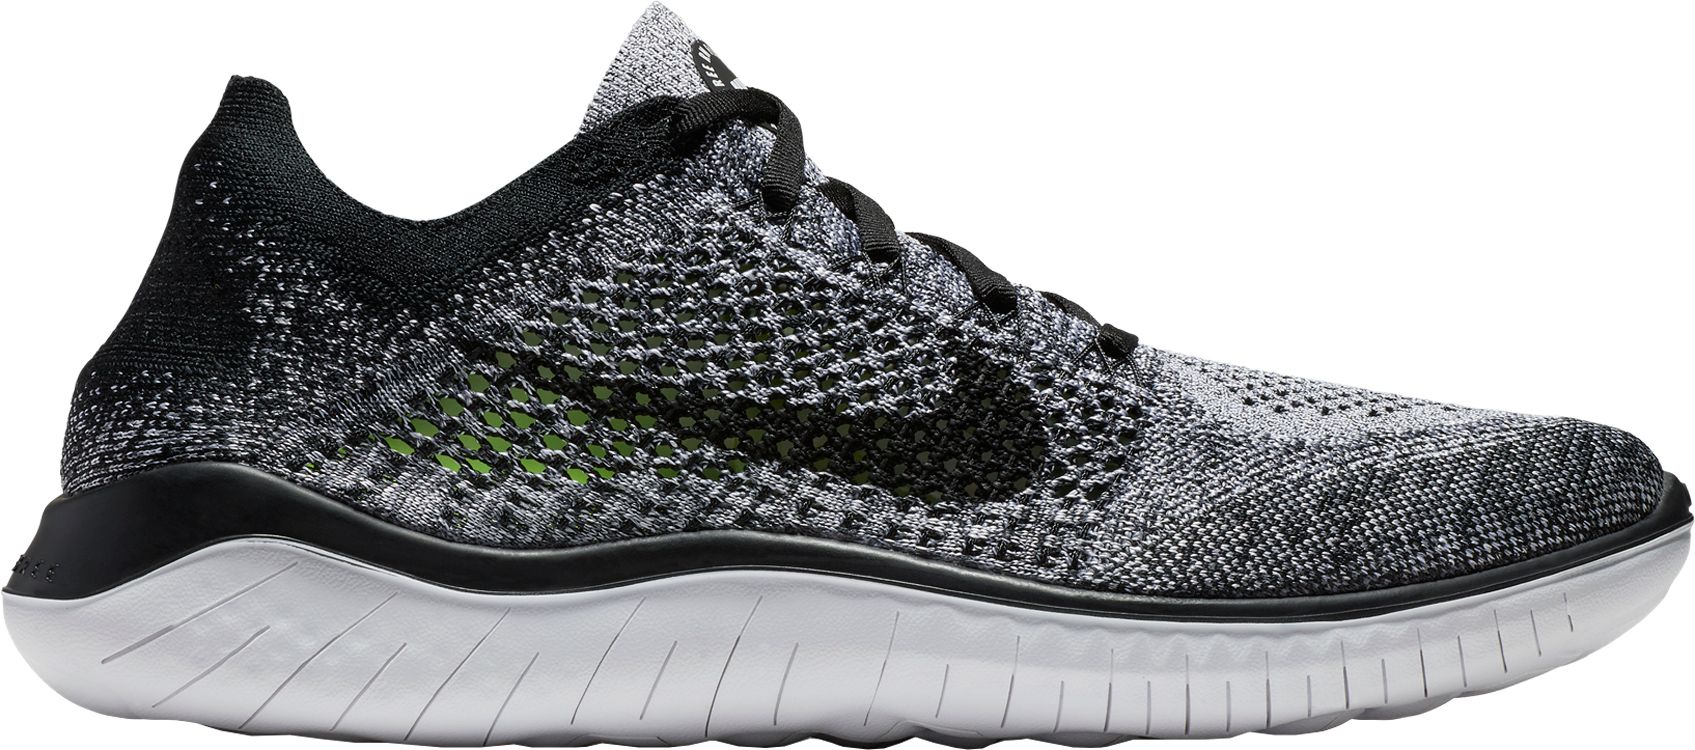 nike flyknit running shoes 2018